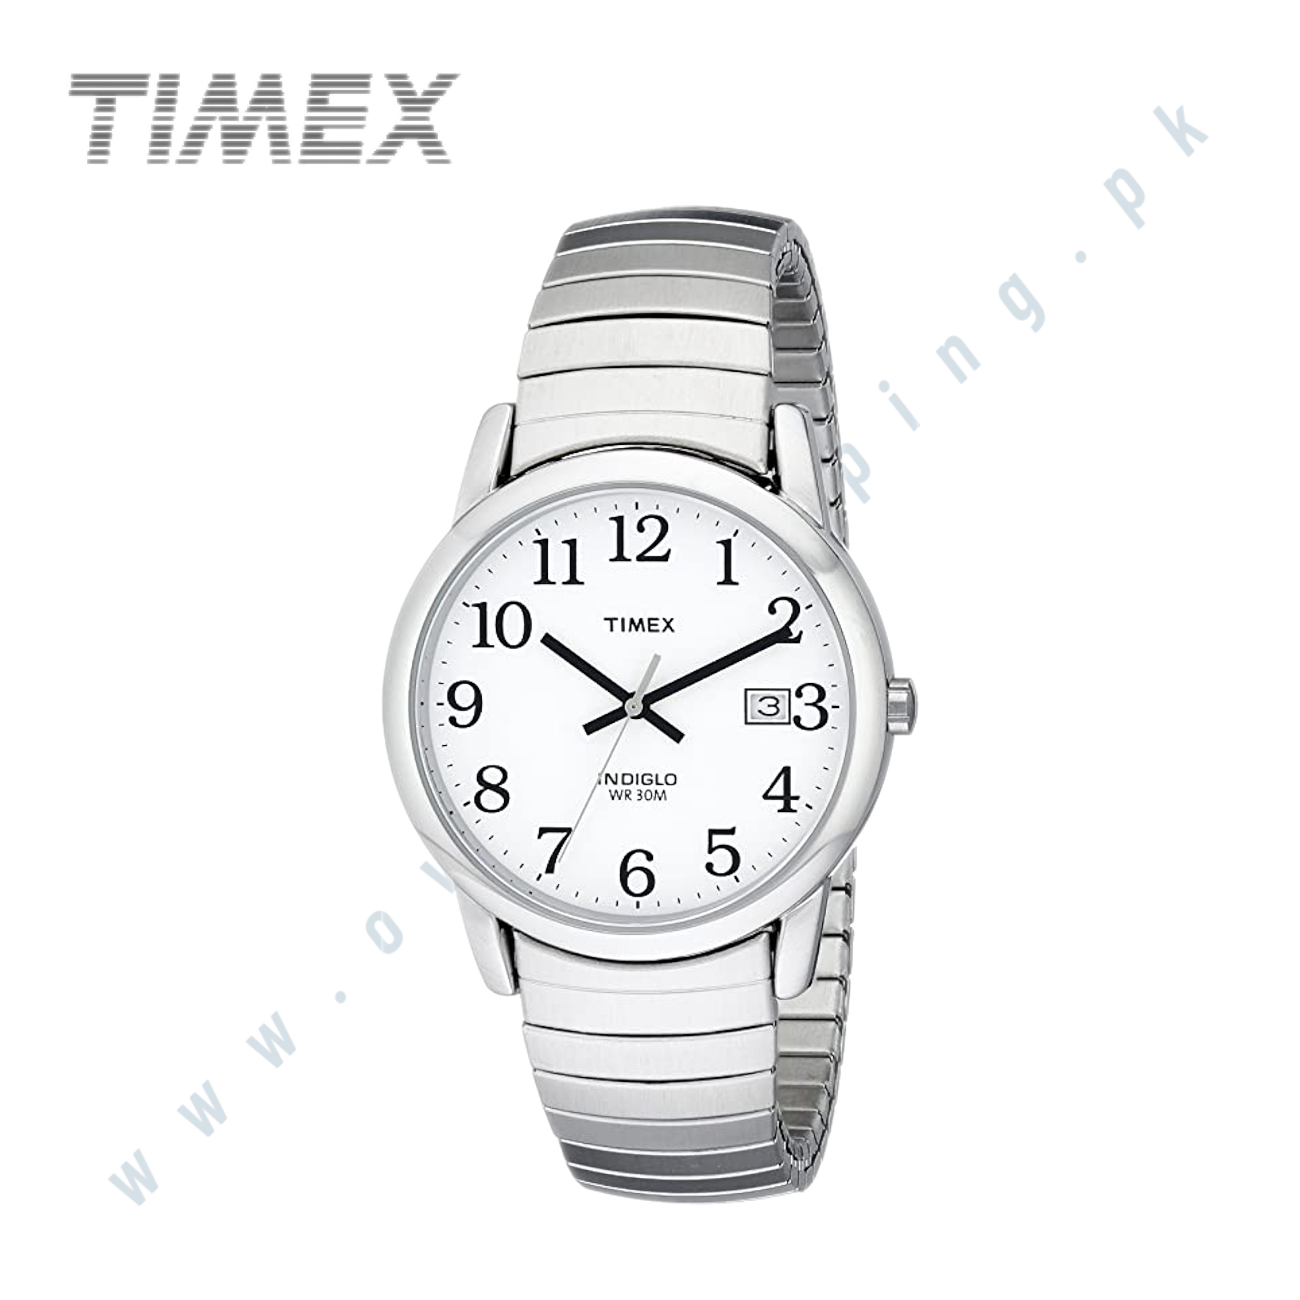 The Timex Men's Easy Reader 35mm Date Watch: A Classic Timepiece for Every Occasion